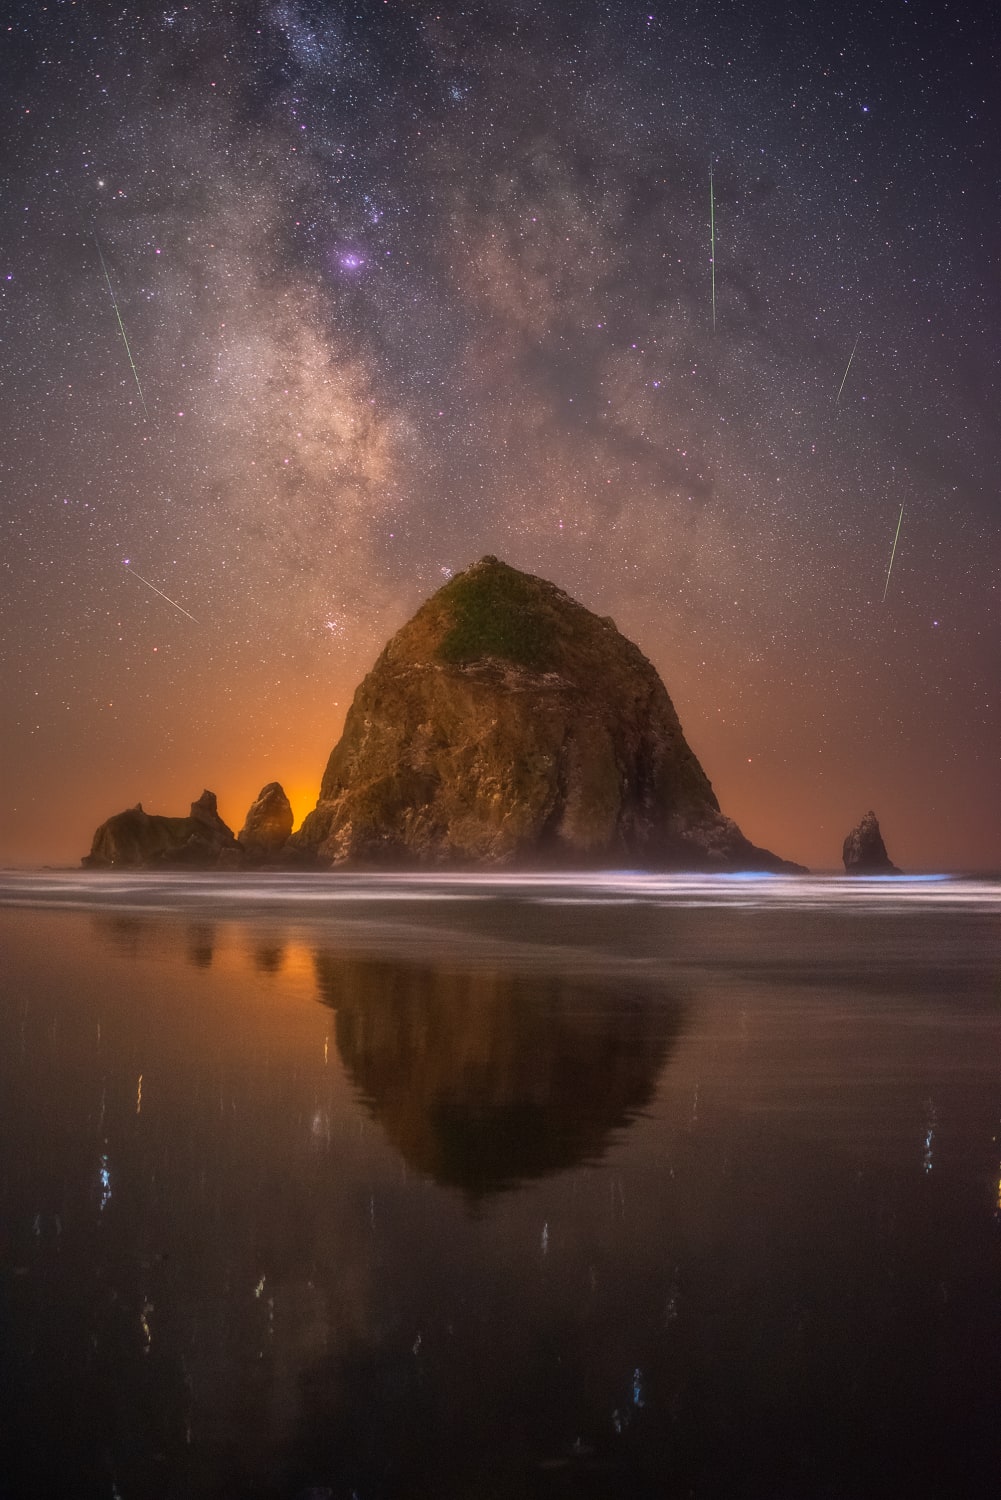 Cannon Beach at night during the Perseid Meteor Shower